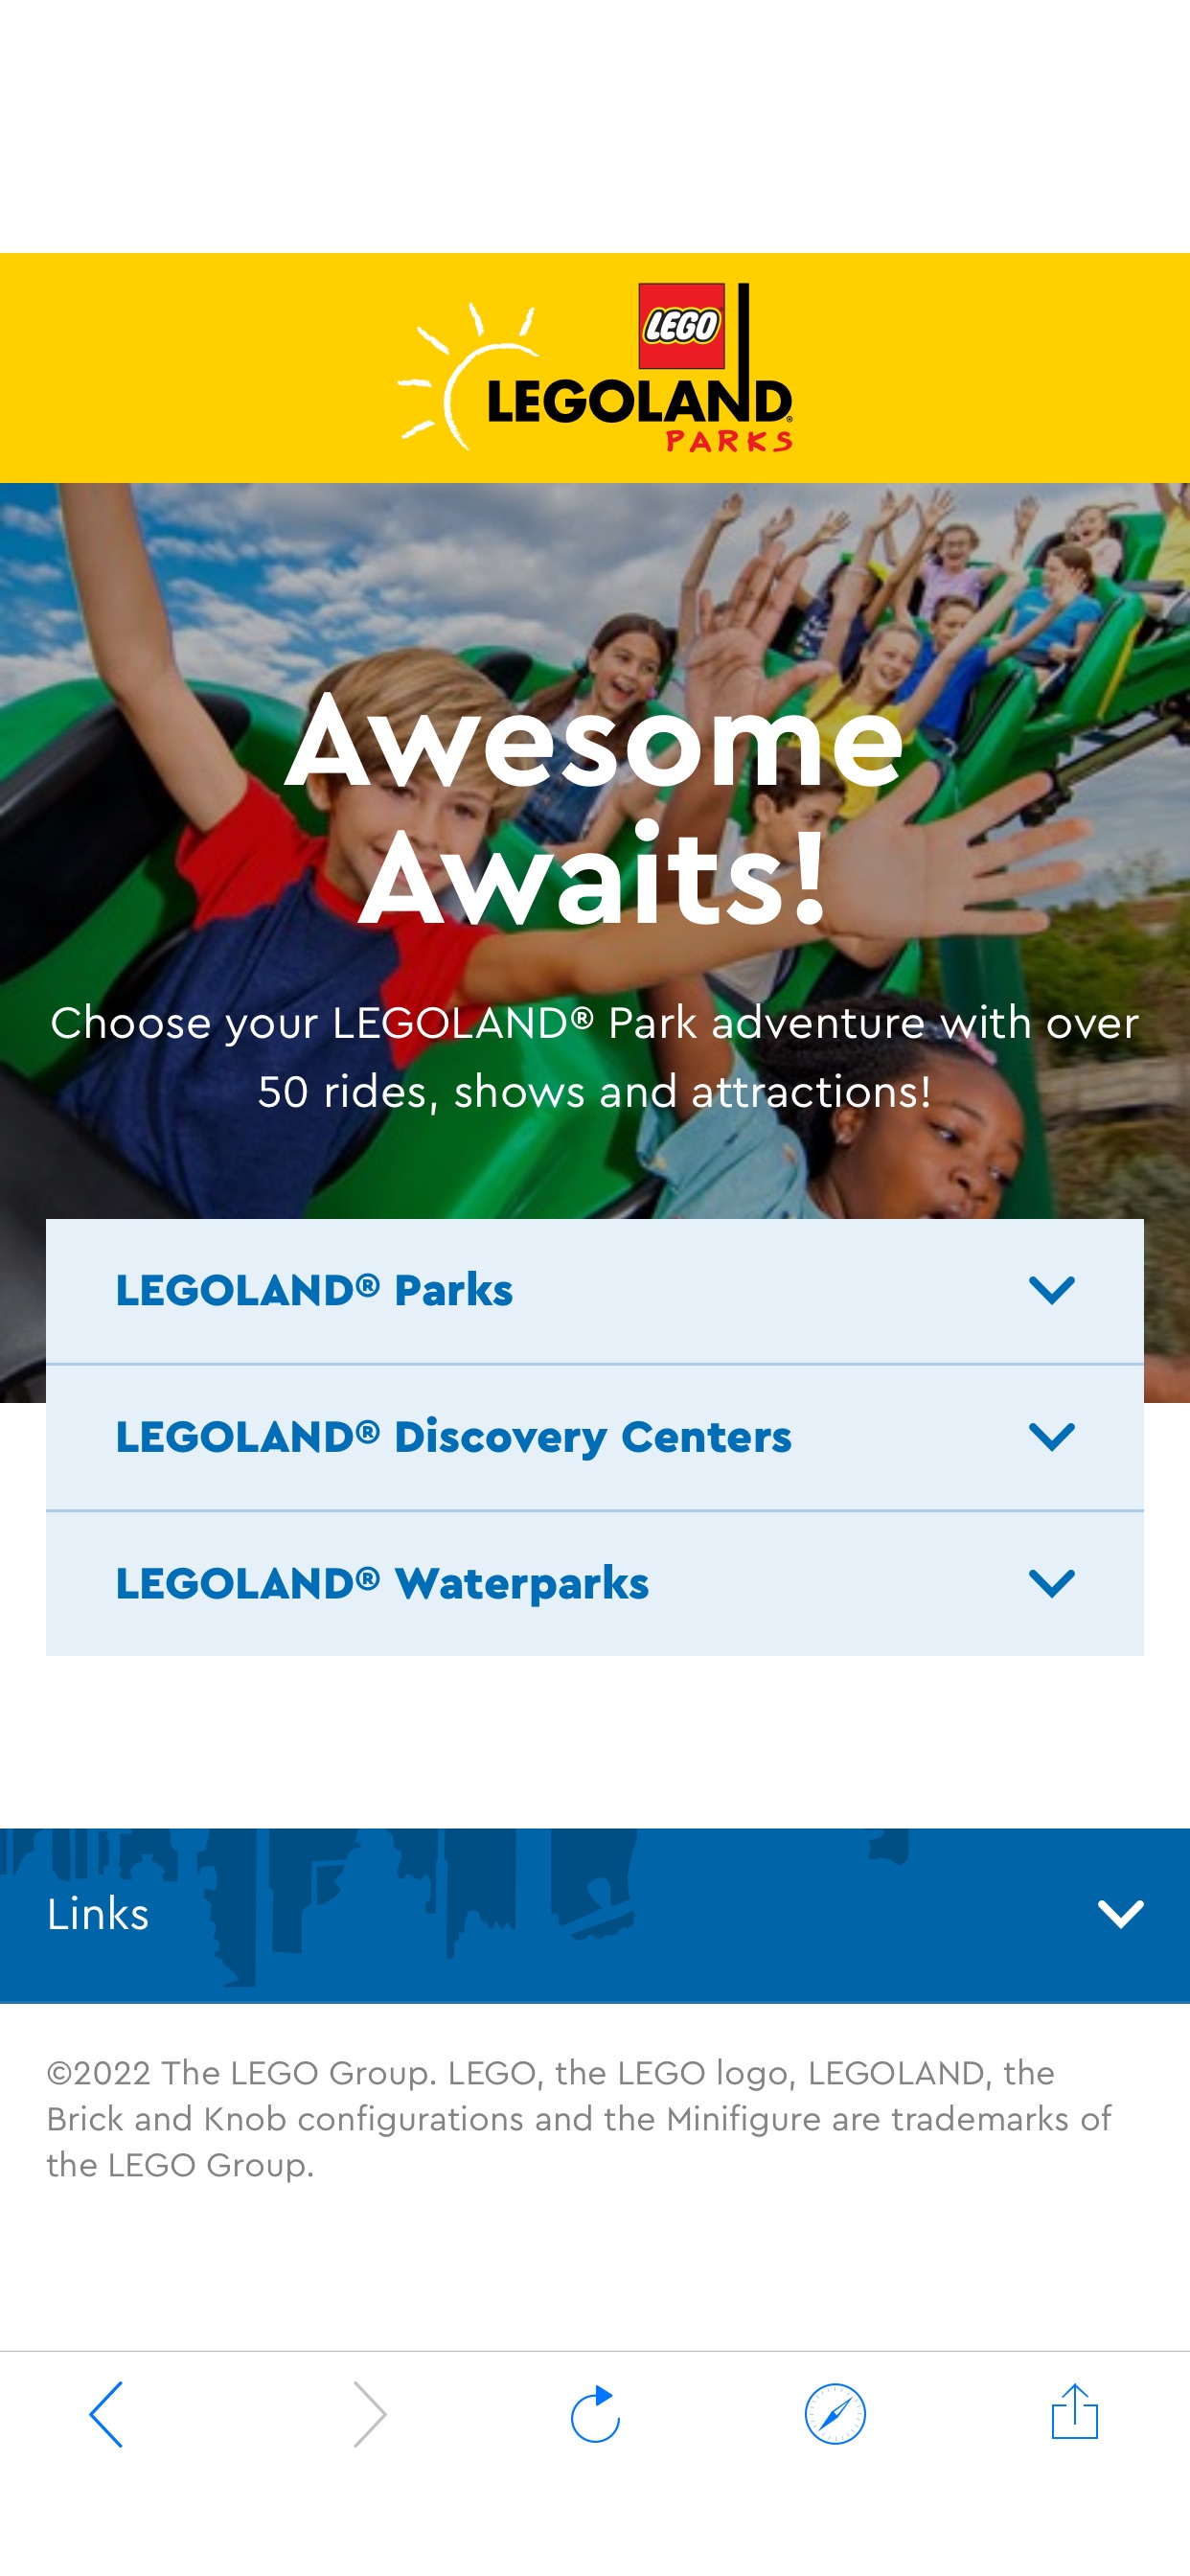 Awesome Awaits at LEGOLAND® Parks and Hotels 乐高乐园门票半价